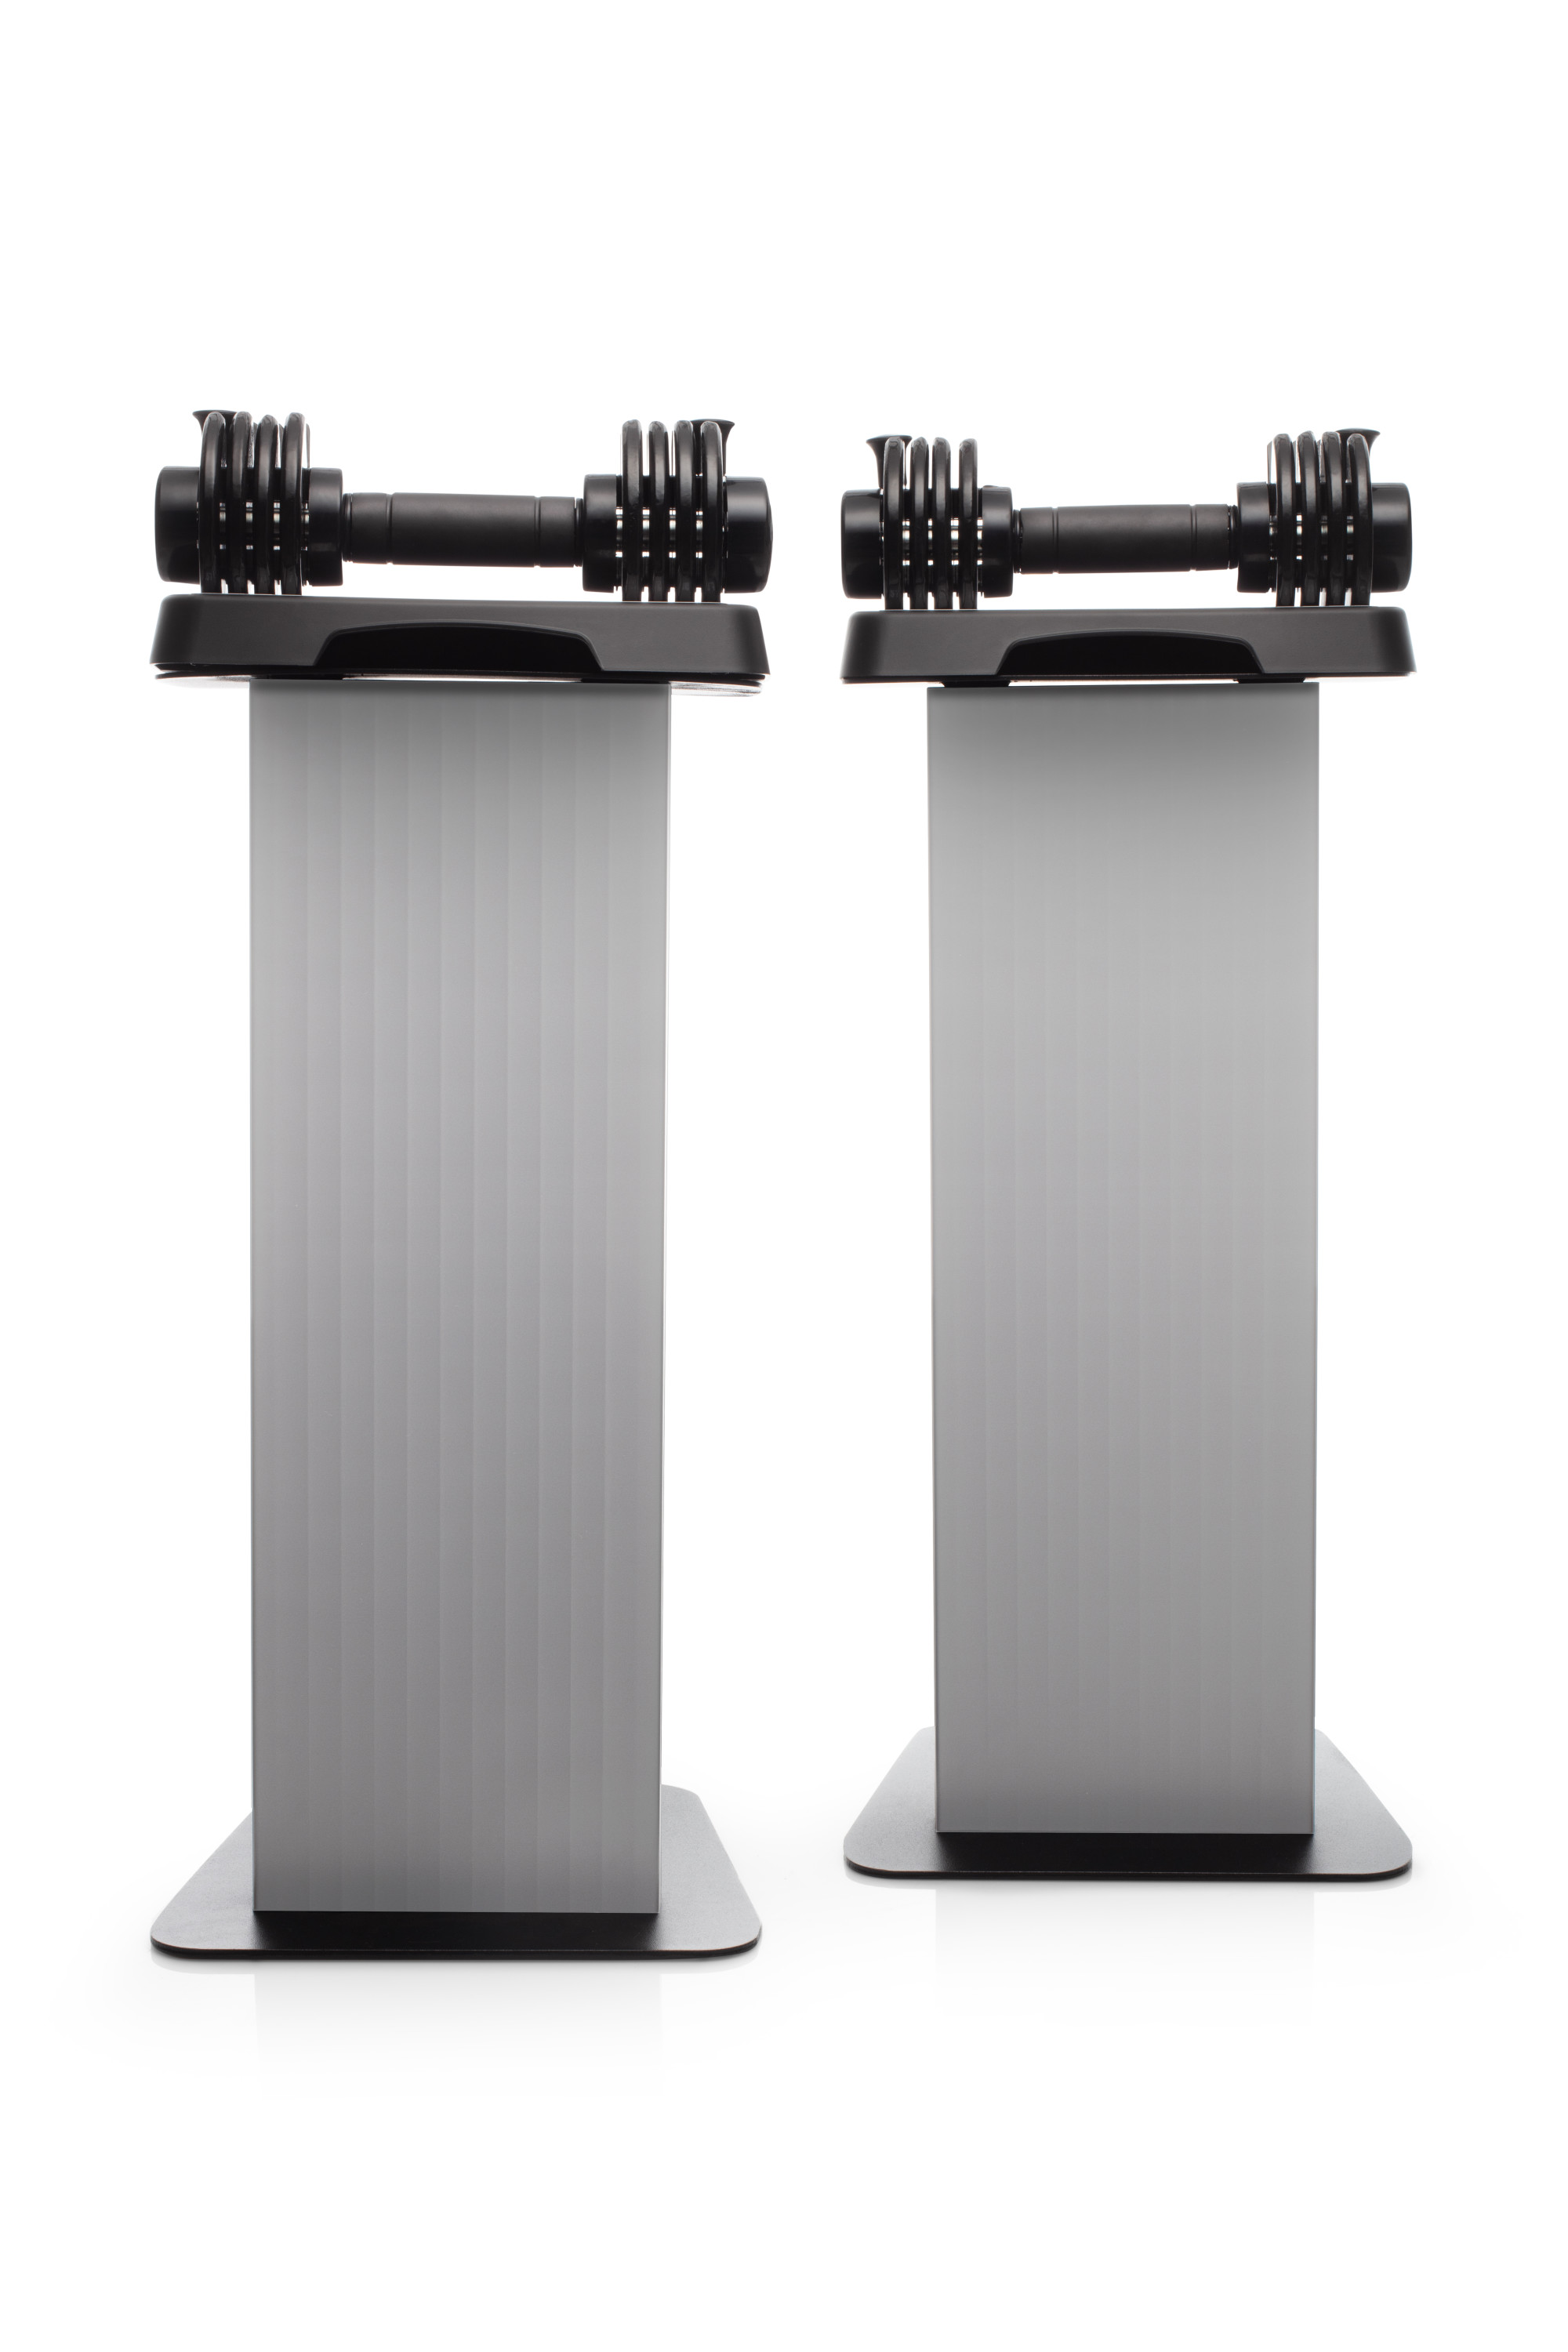 NordicTrack 12.5 lb. Adjustable Dumbbells with Weight Stands, Sold as Pair - image 4 of 10